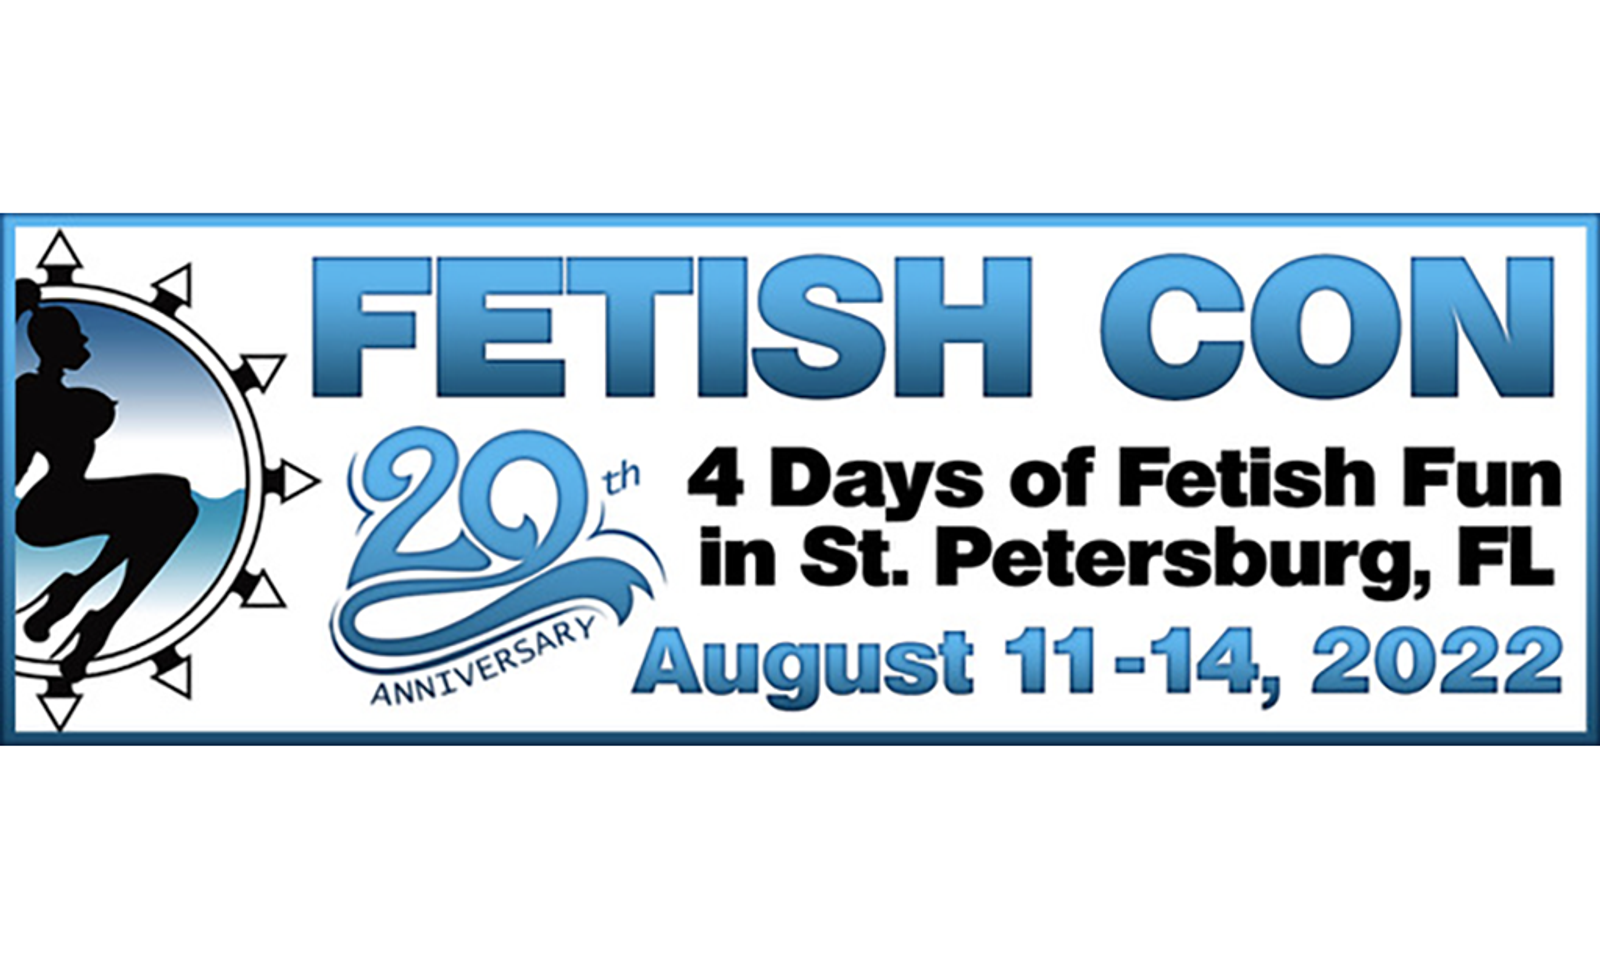 Fetish Con Cancels All 2021 Dates